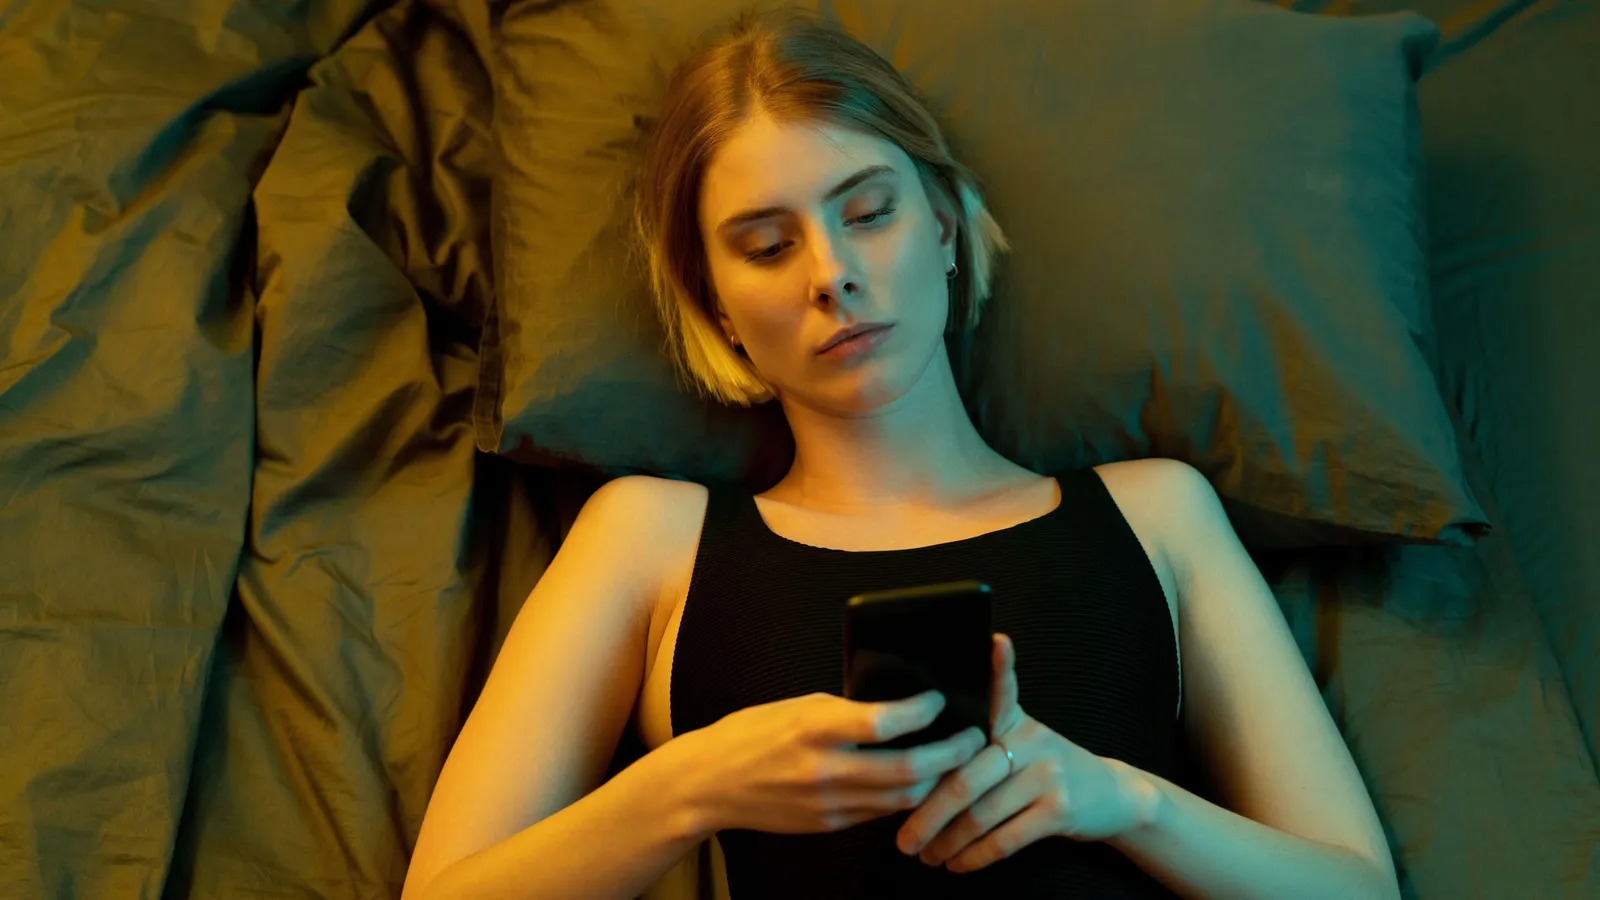 It’s Time to Find Out If You’re More Logical or Emotional With This “This or That” Game Woman using phone in bed